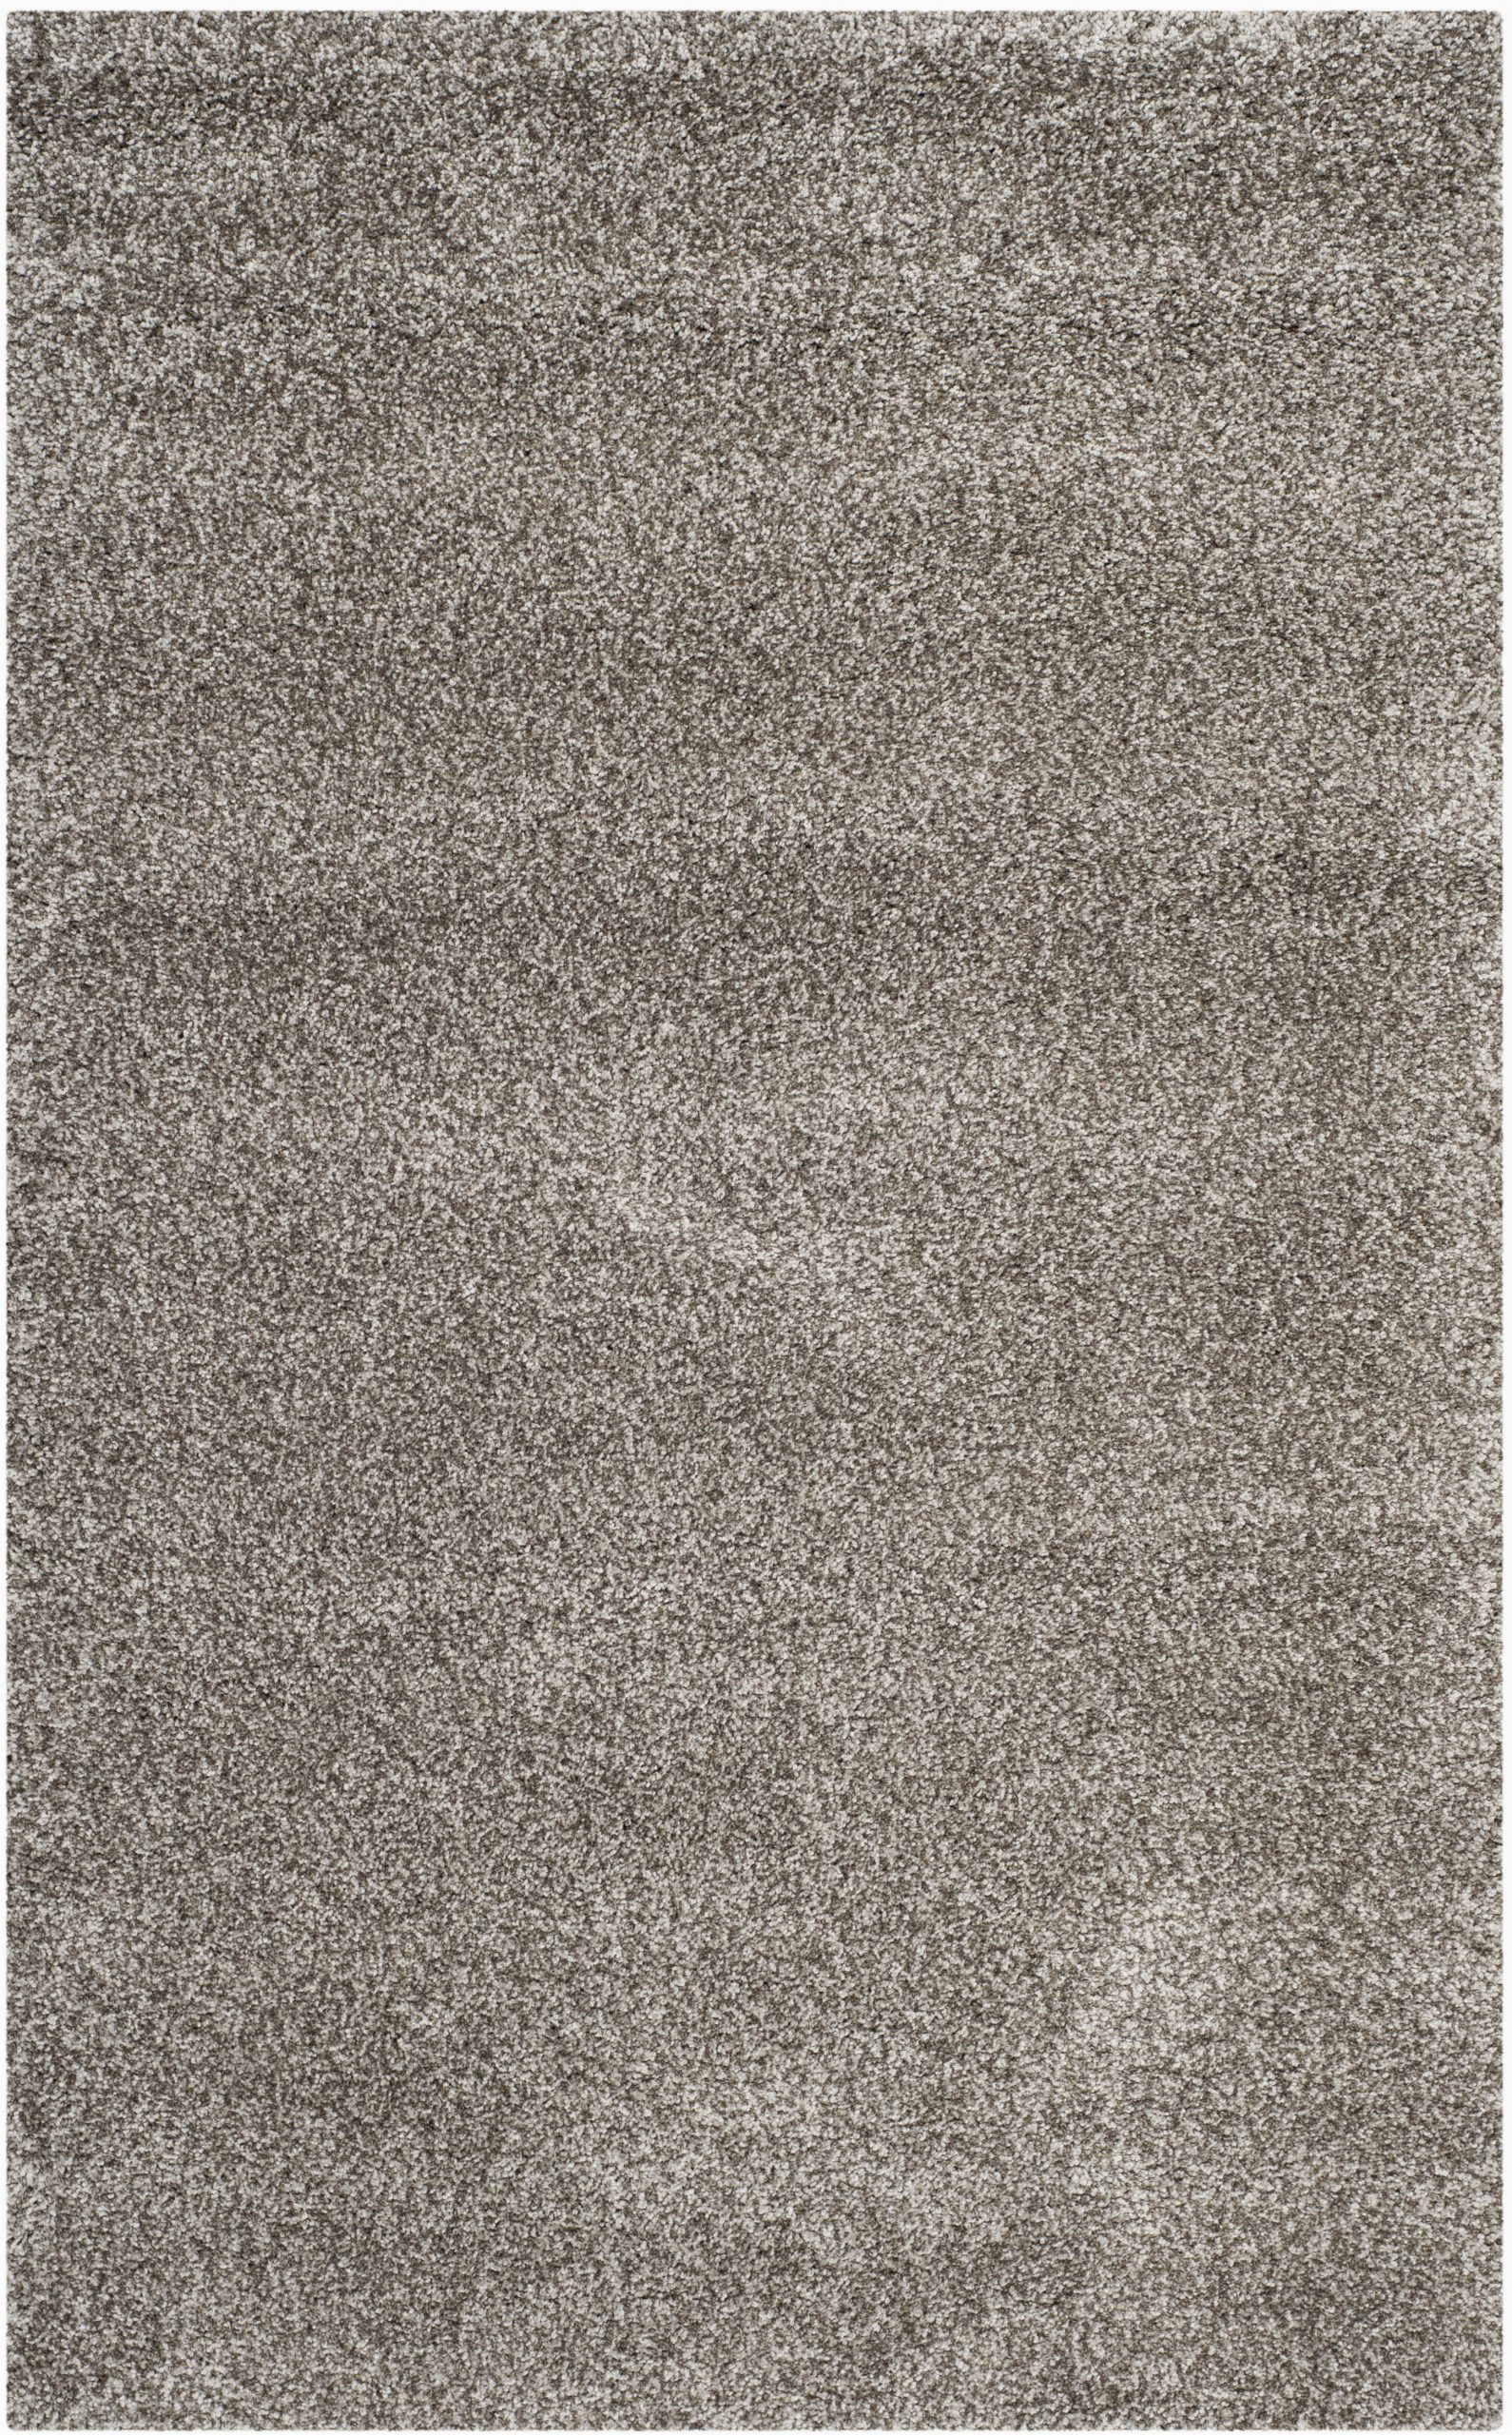 Starr Hill Ivory area Rug Starr Hill Ivory Gray area Rug